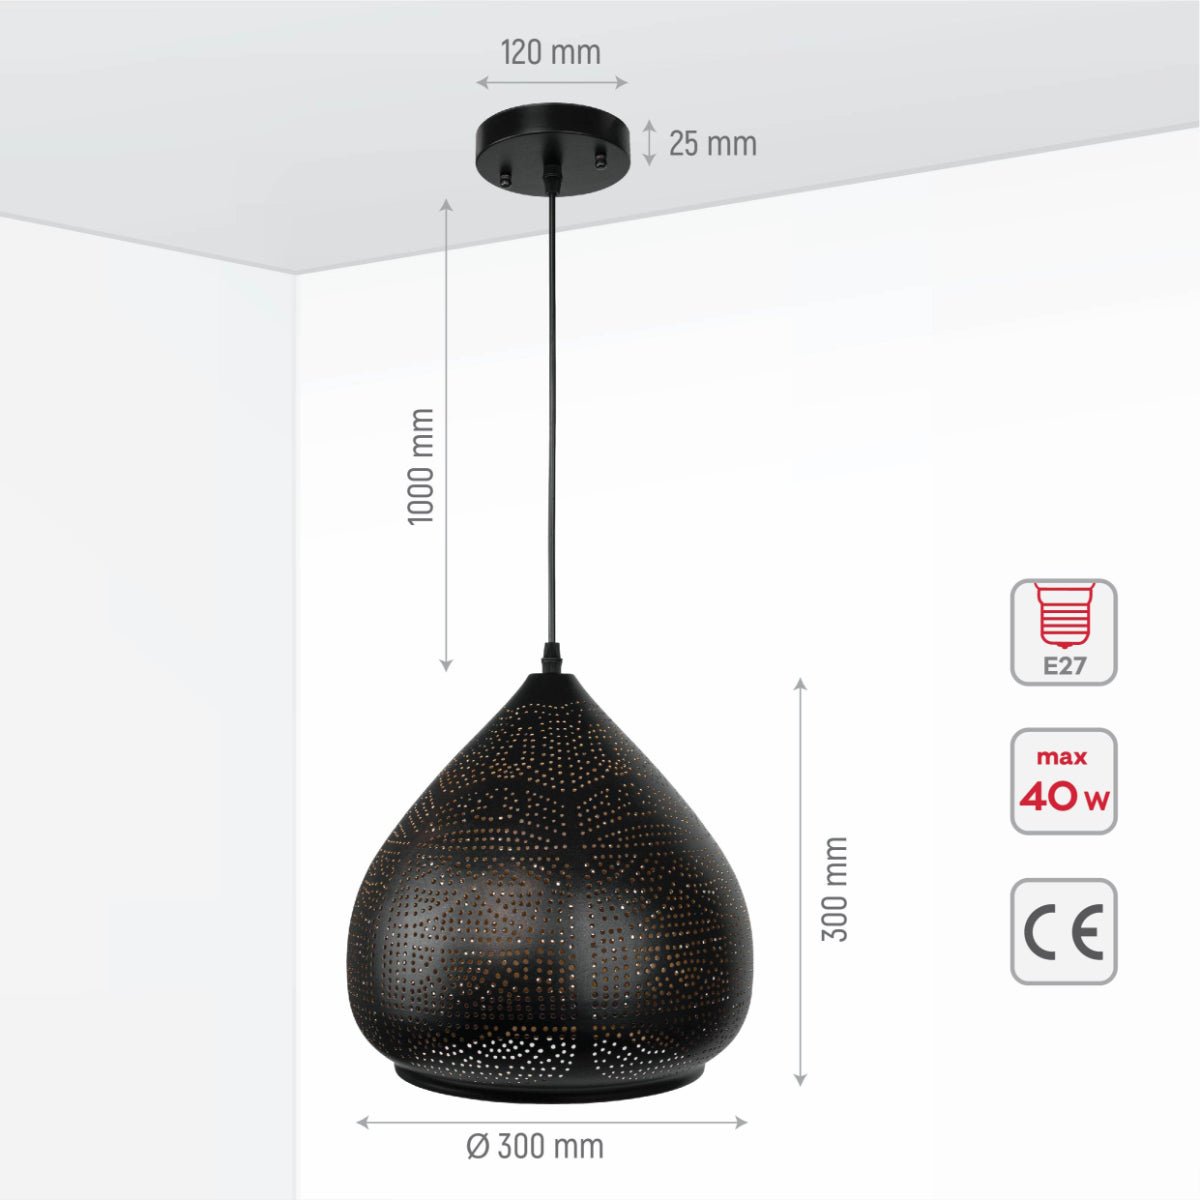 Size and specs of Black-Golden Metal India Dome Pendant Ceiling Light with E27 | TEKLED 150-17958